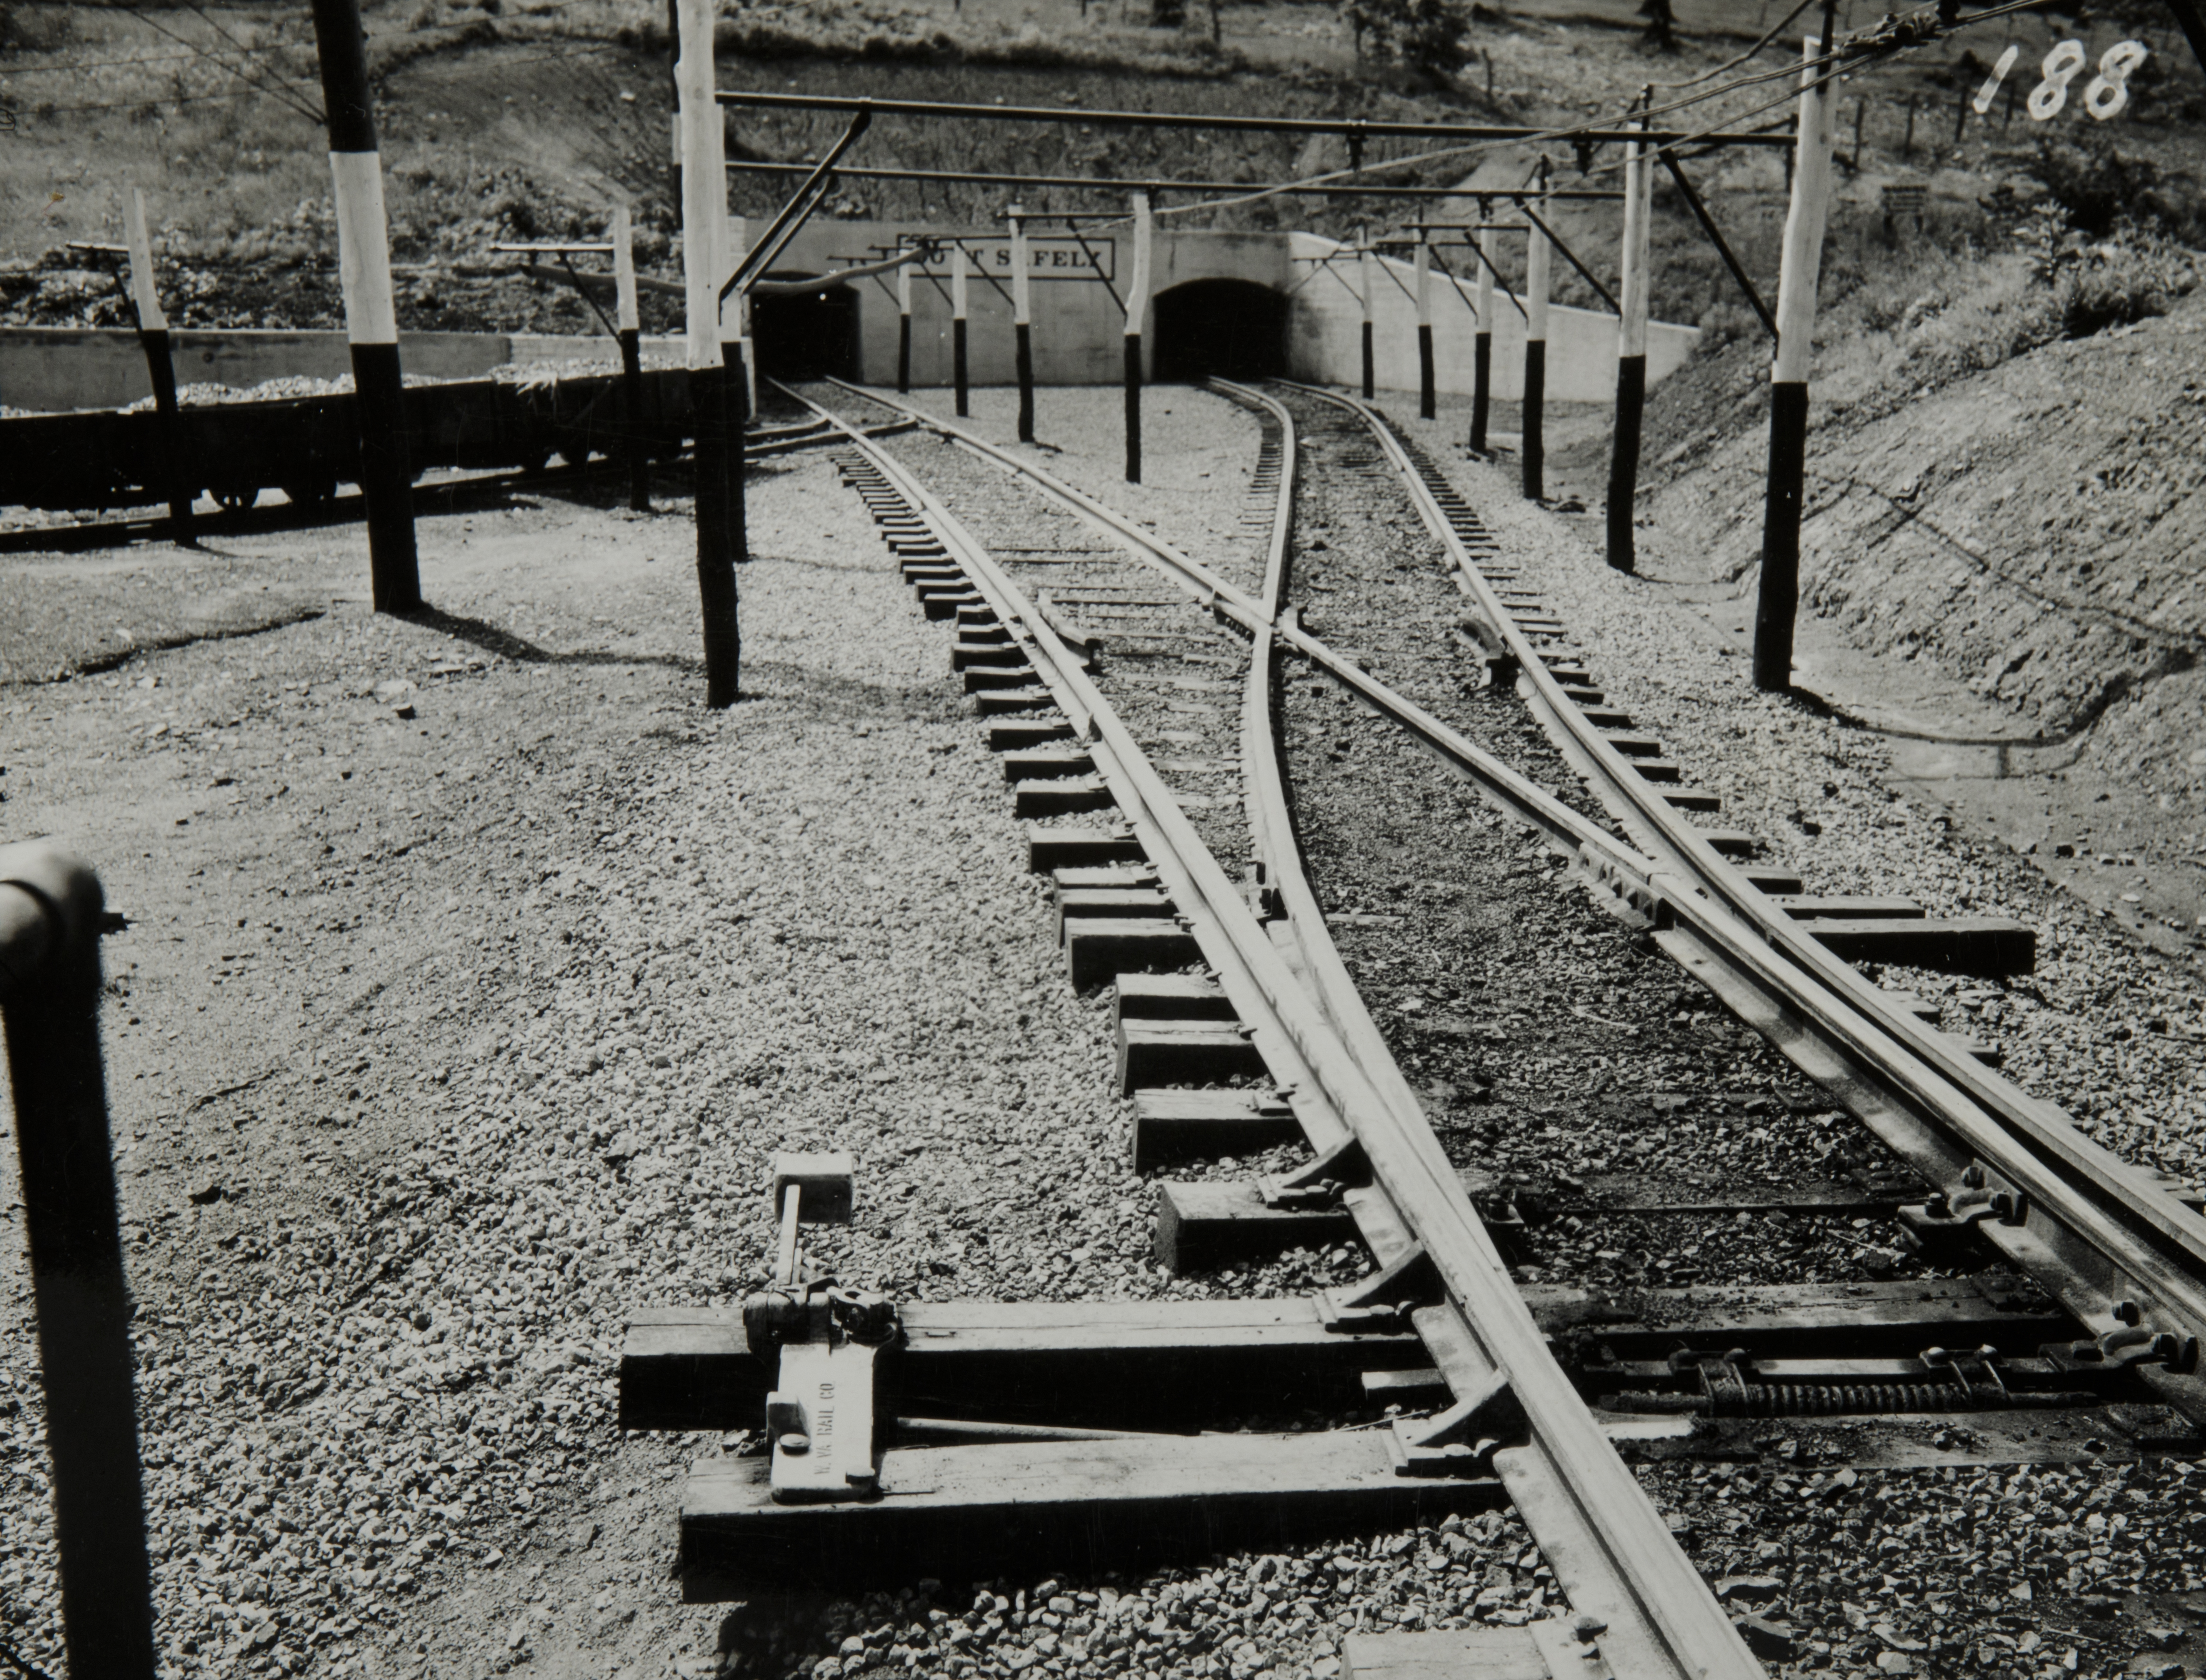 Untitled [Railyard with tunnels]